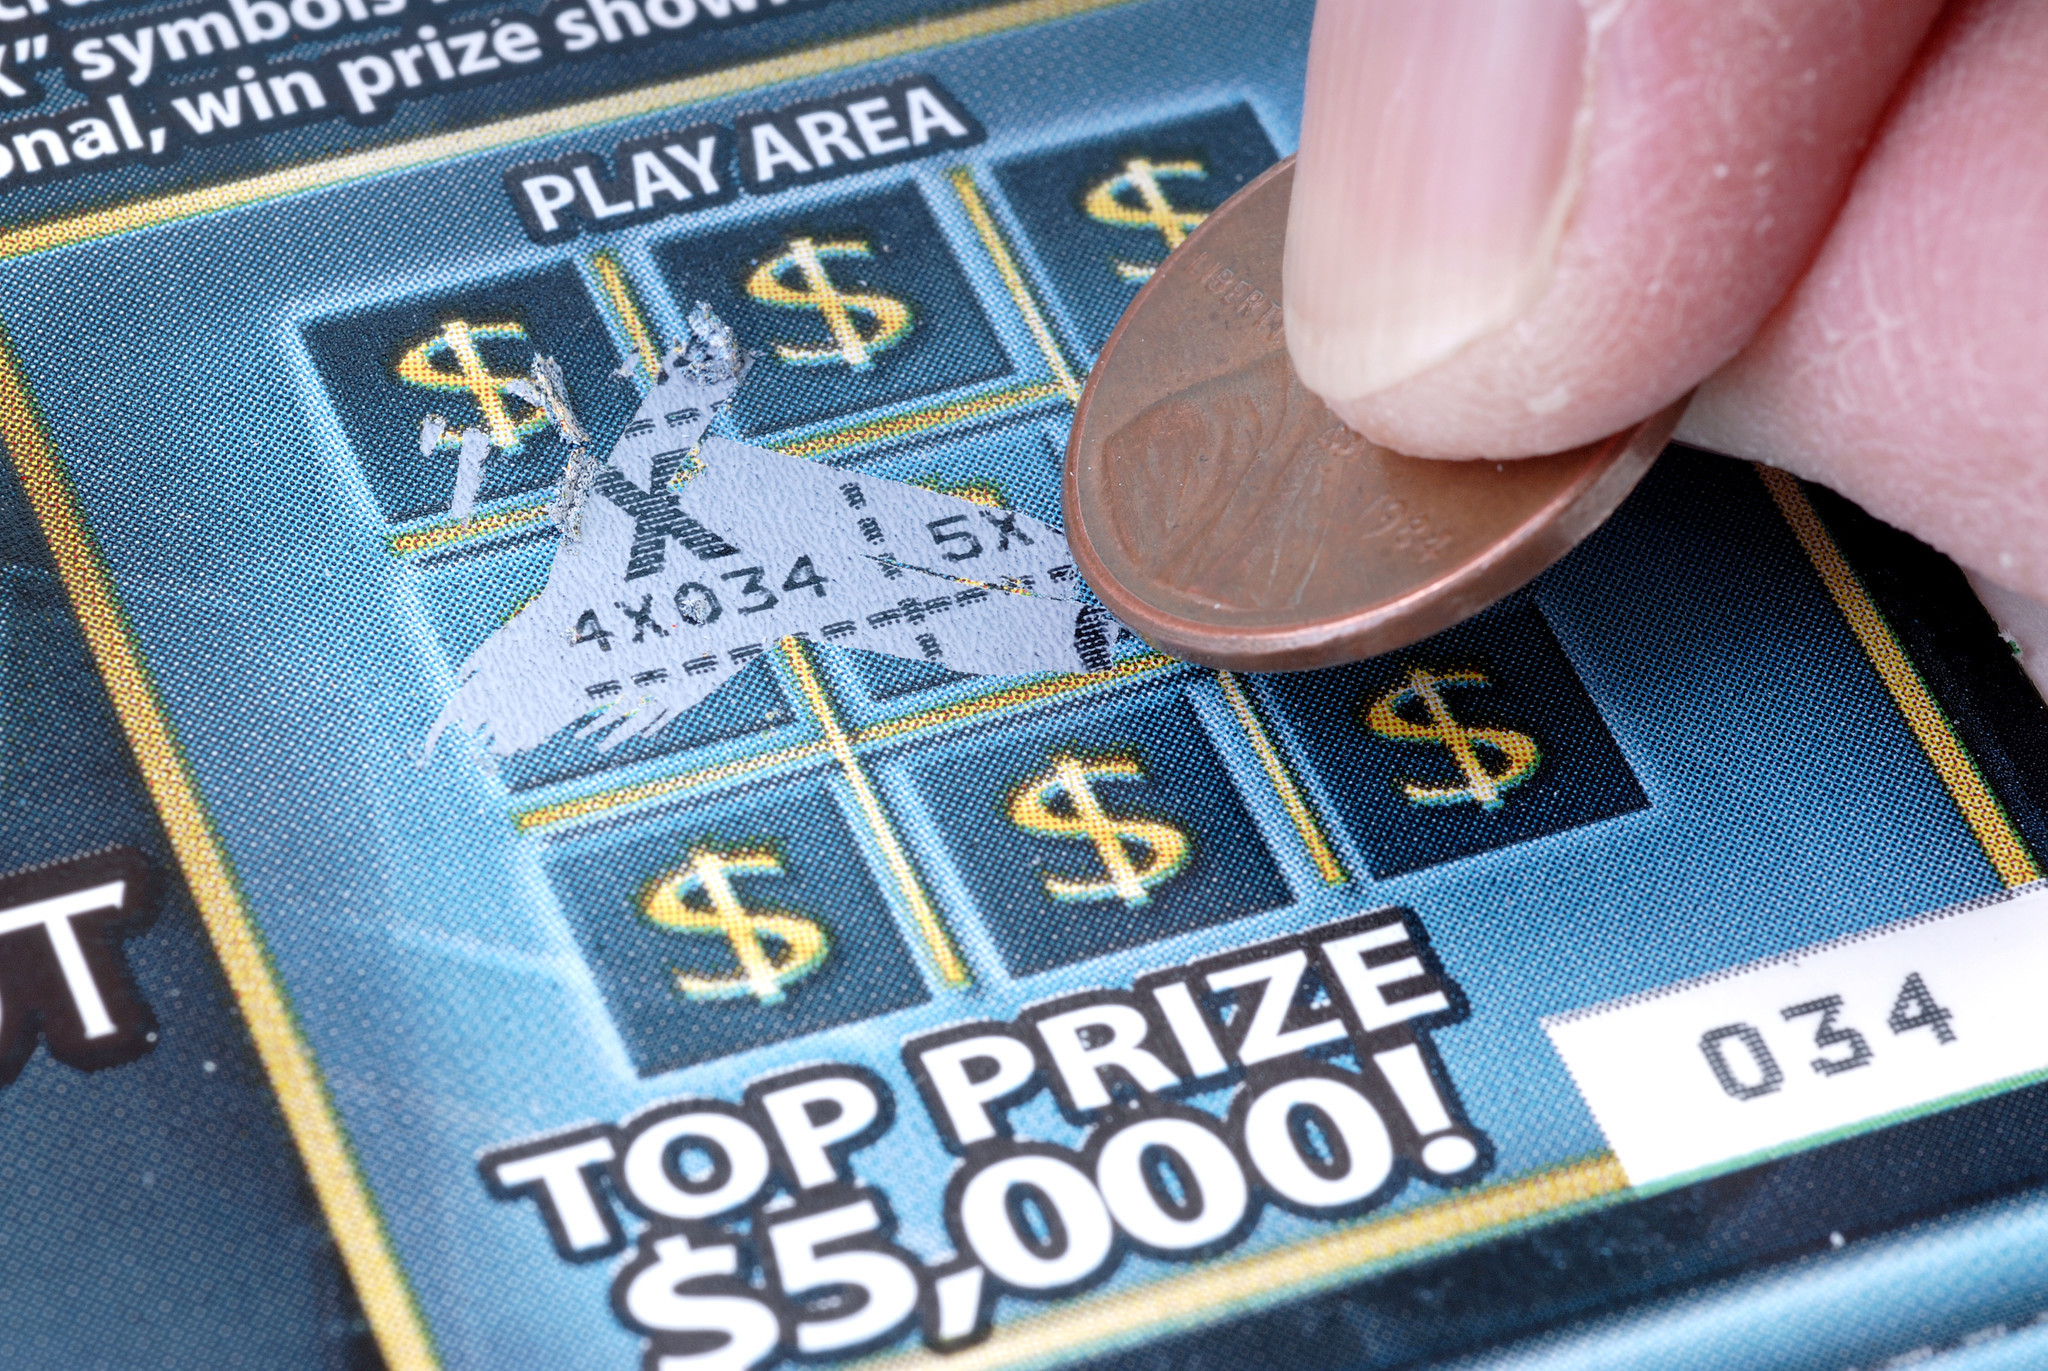 Was It Luck? 2 Winning Lottery Tickets Bring Lawsuit, Police Probe - Hartford Courant2048 x 1371